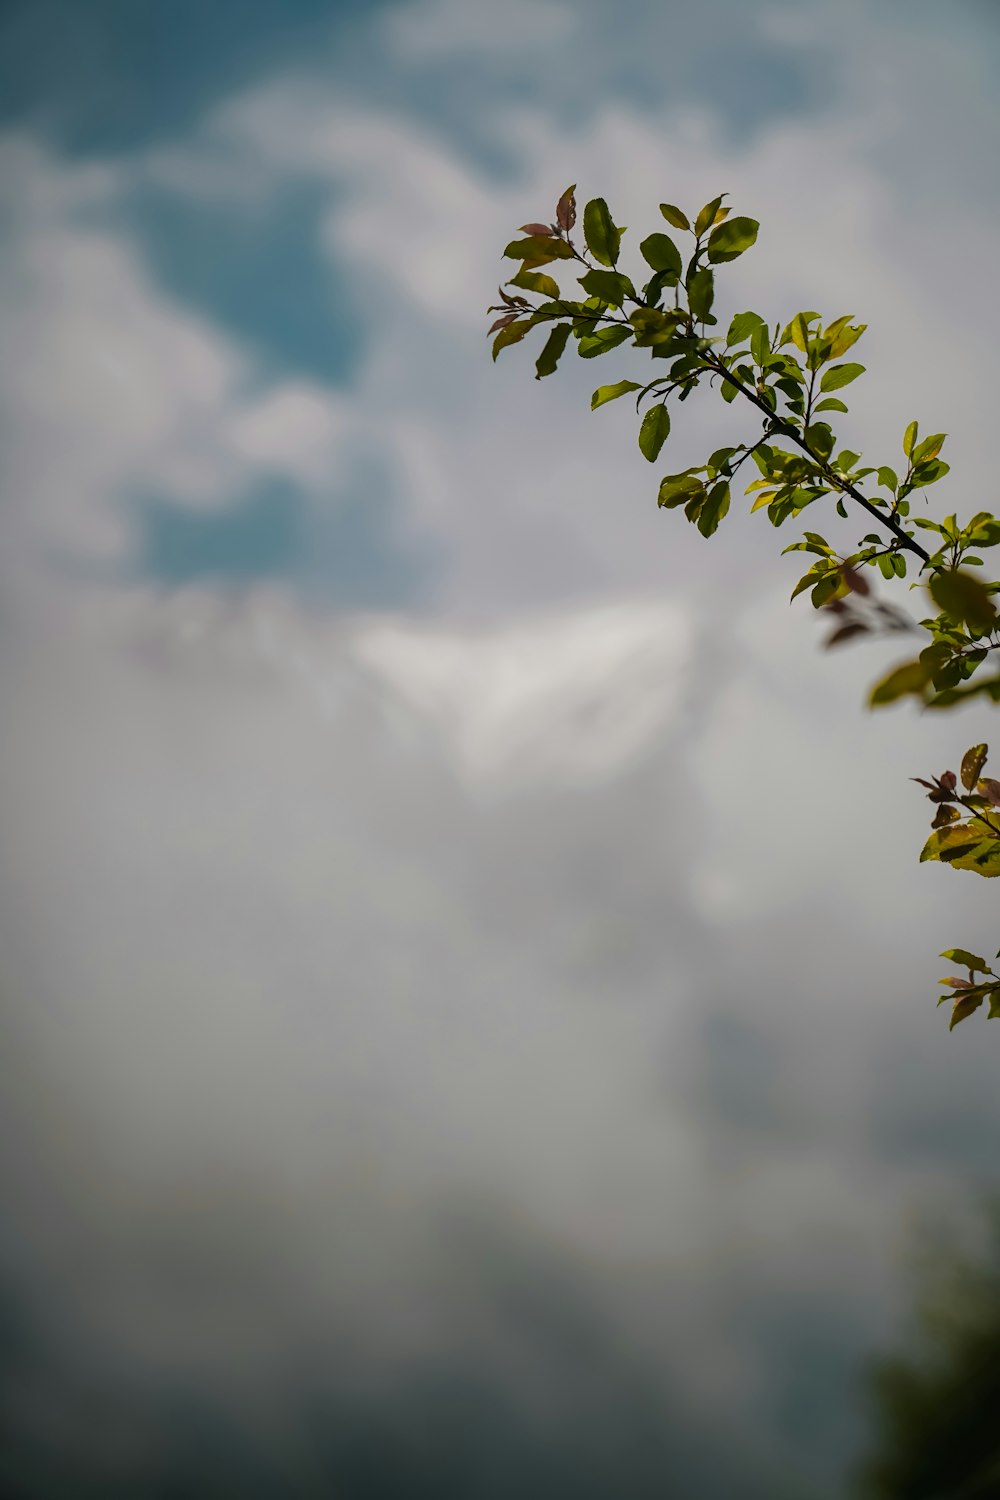 a tree branch with green leaves in front of a cloudy sky